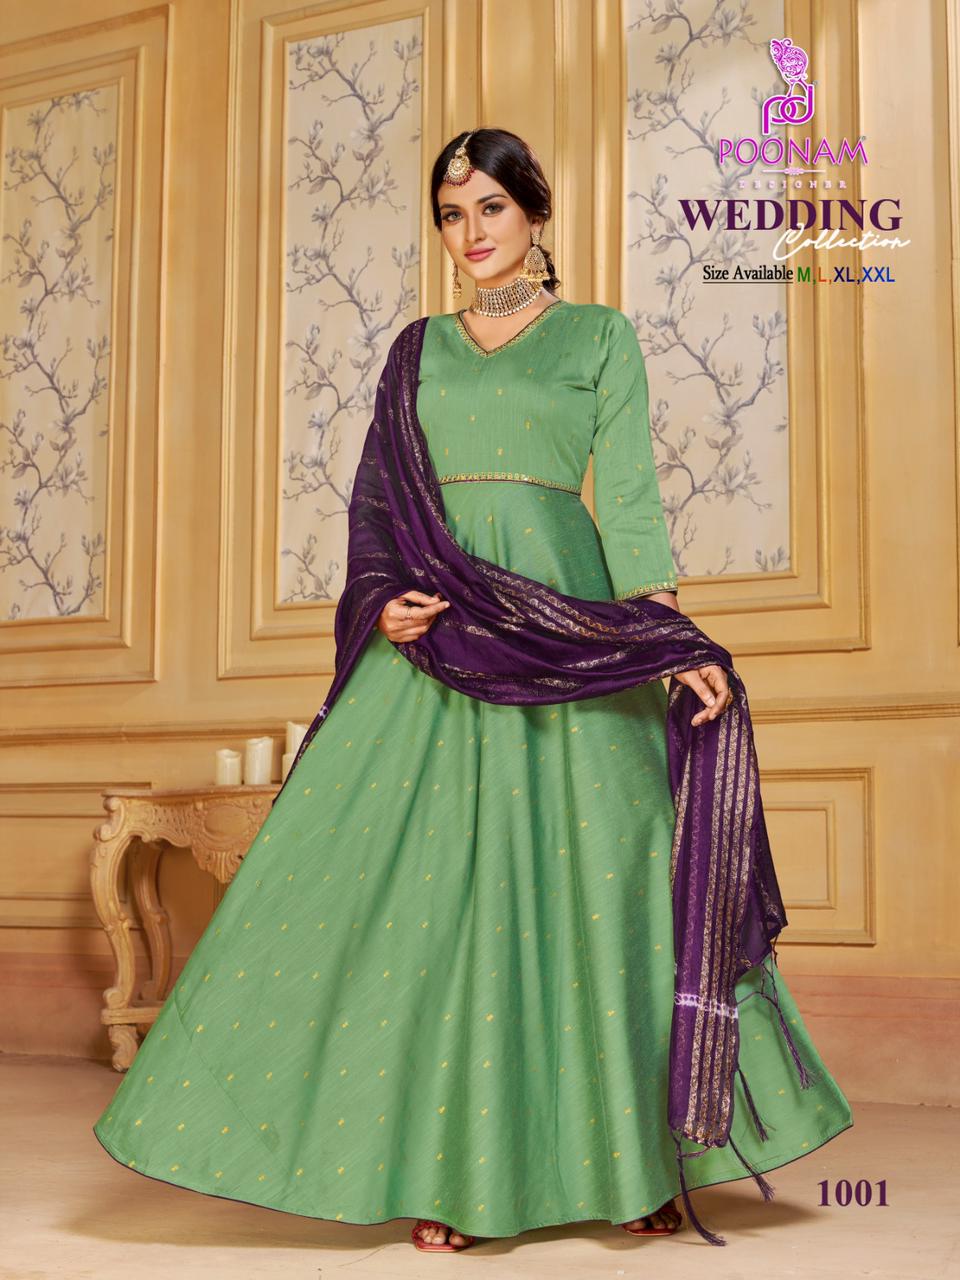 Poonam Wedding Collection collection 2